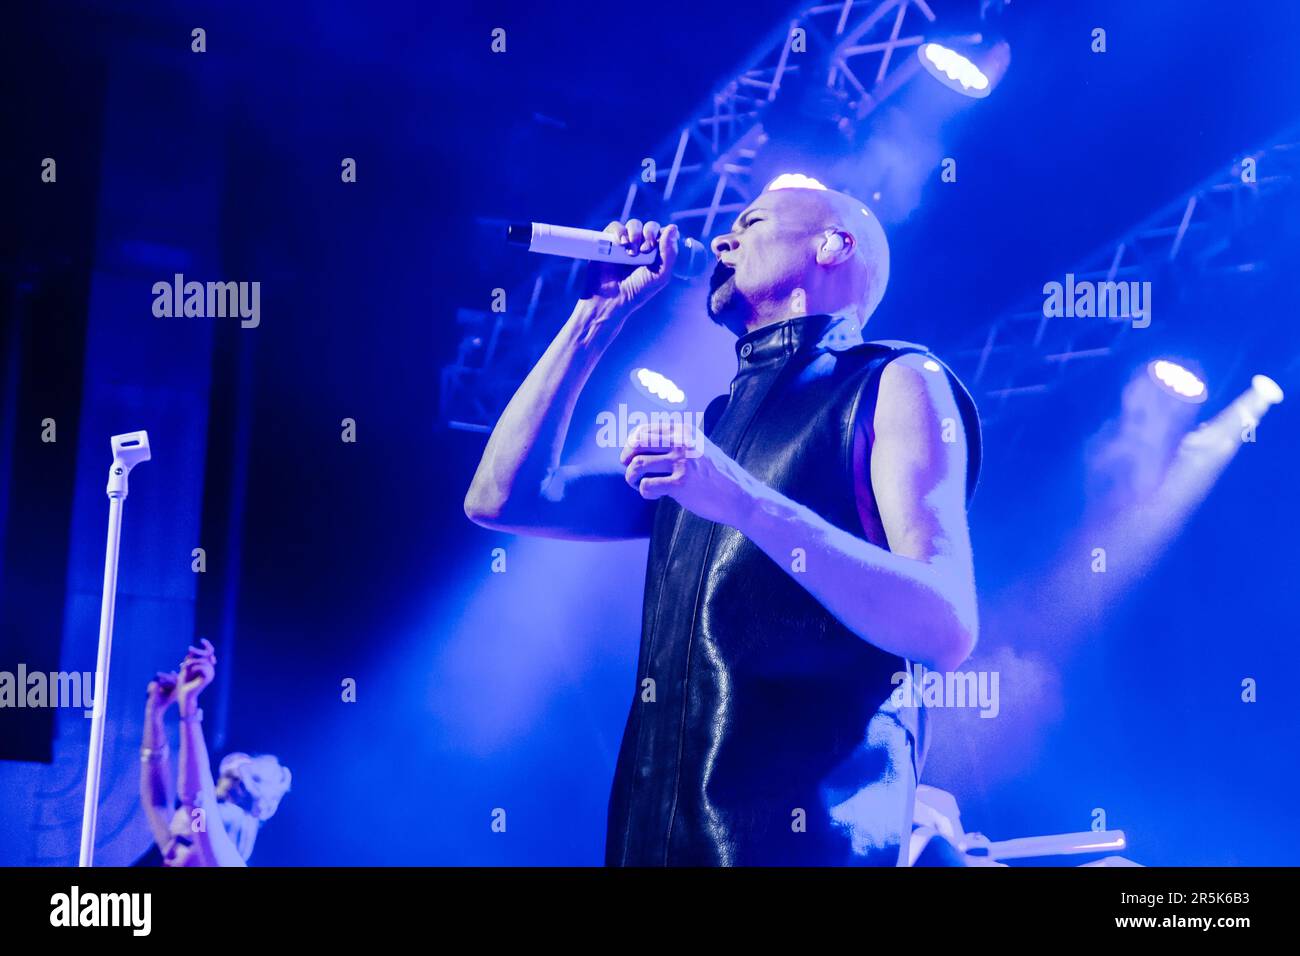 Cologne, Germany, 15.11.2016. British New-Wave group The Human League perform to a sell-out audience at the Live Music Hall in Cologne, Germany. The g Stock Photo